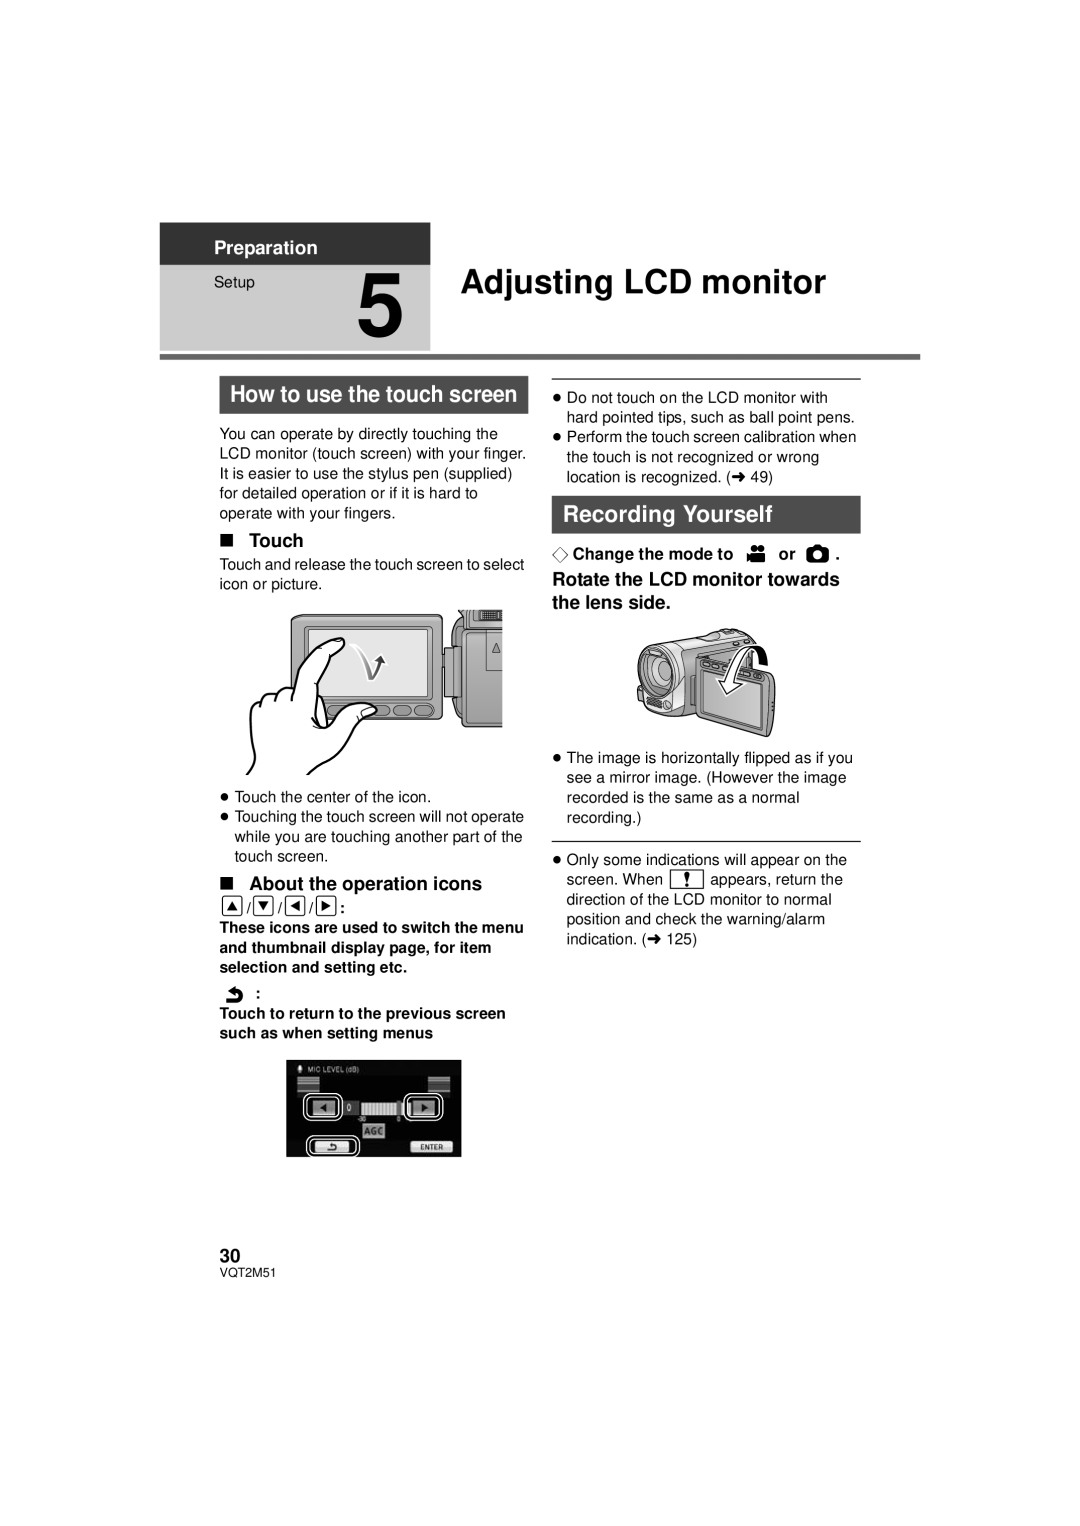 Panasonic HDC-TM55P/PC Adjusting LCD monitor, How to use the touch screen, Recording Yourself, ∫ Touch, Preparation 